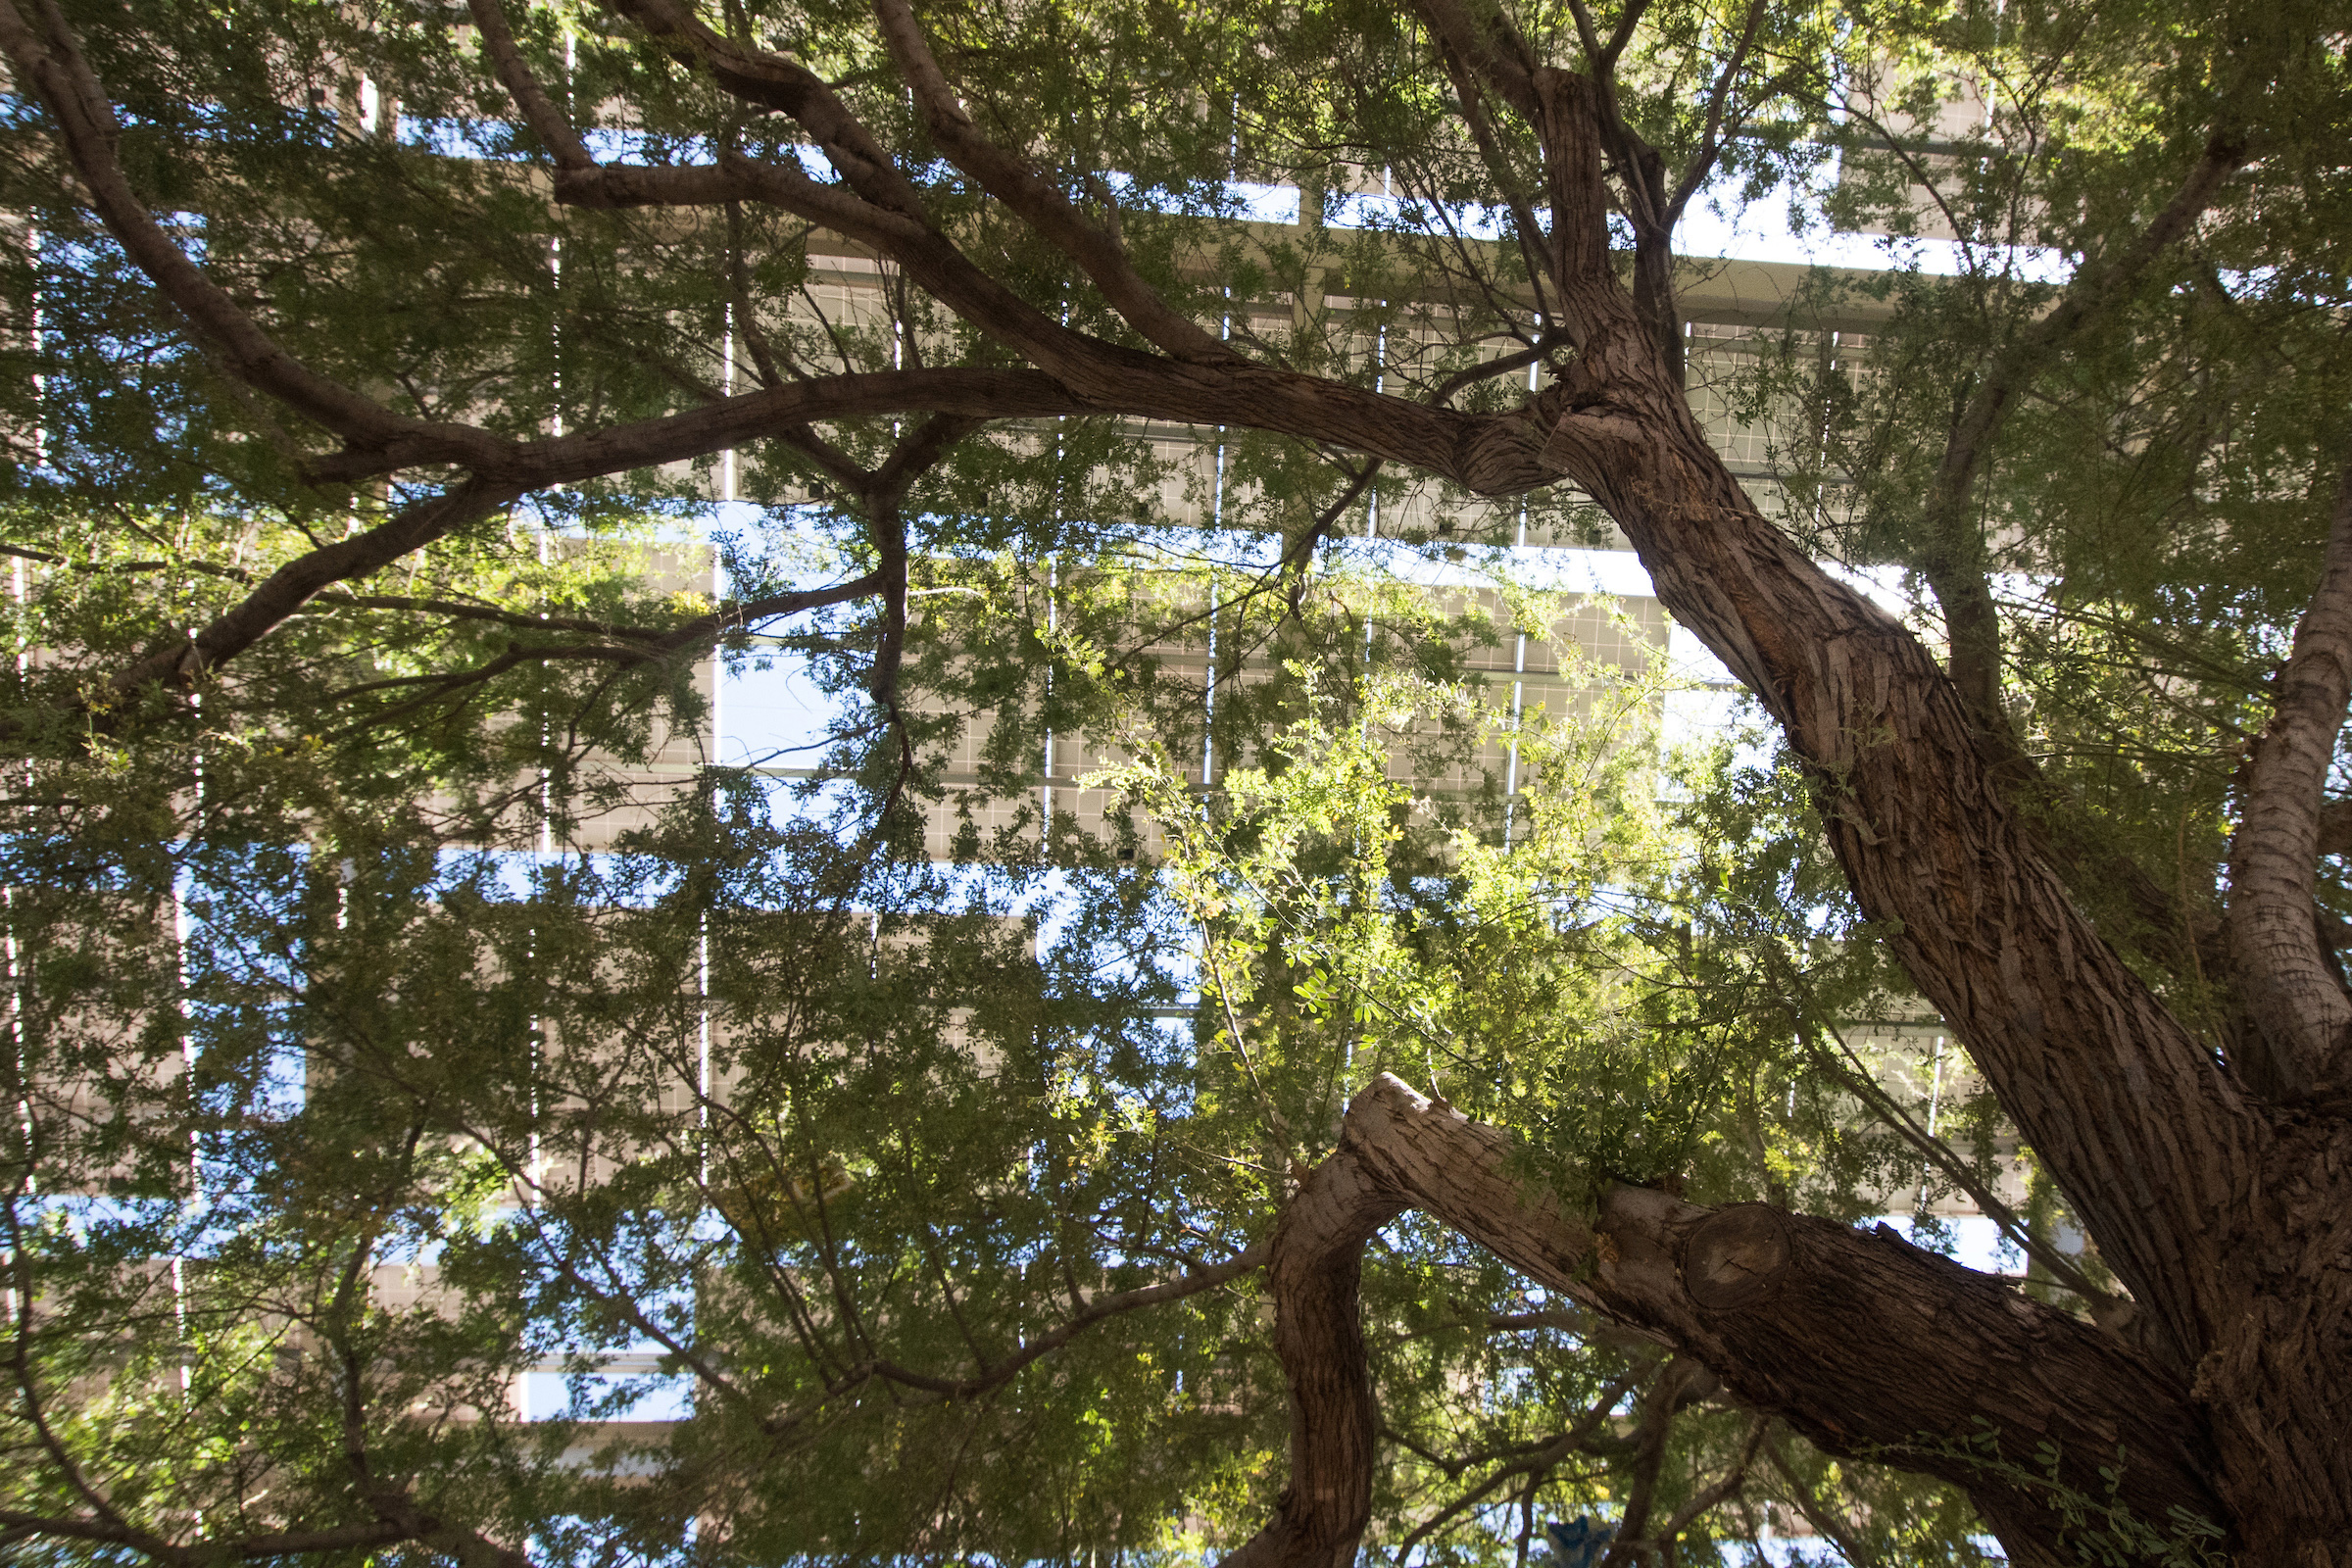 Solar structures as seen through tree branches